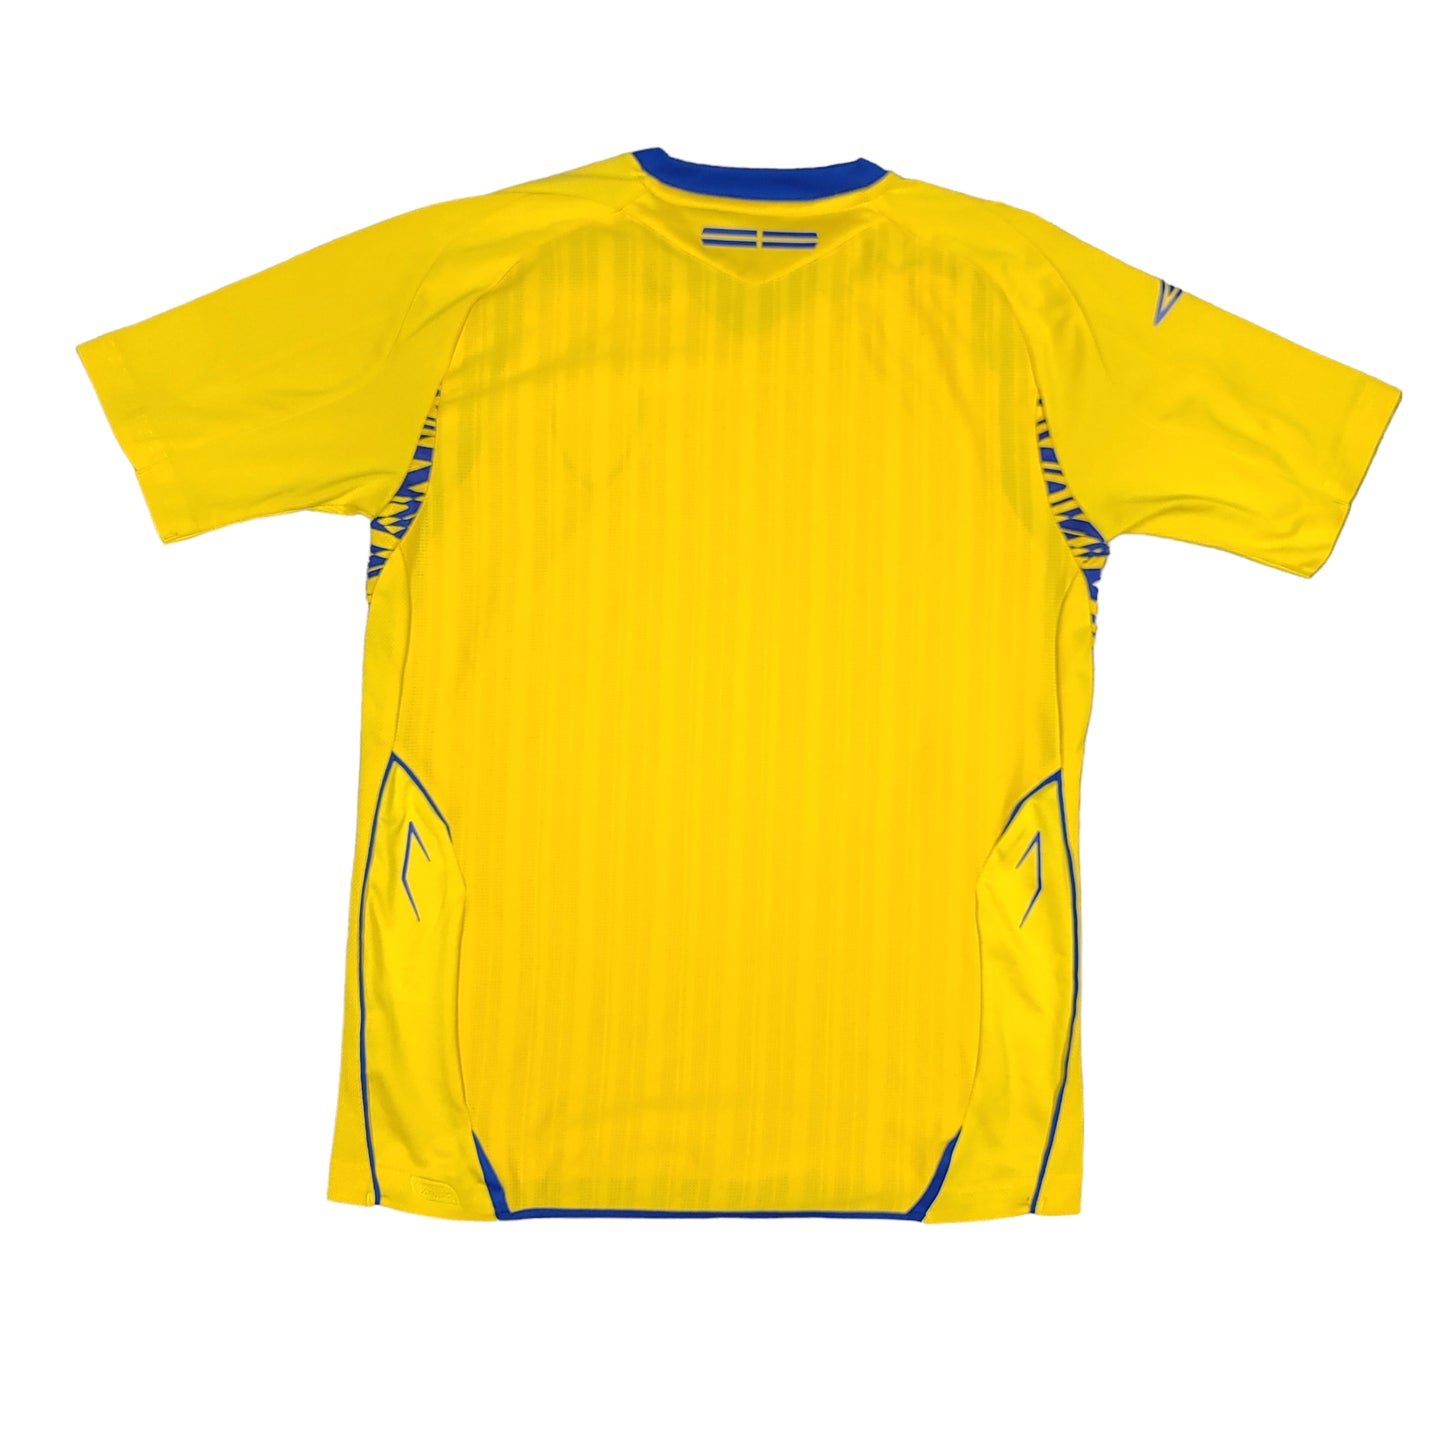 Sweden 2008 Yellow Home Soccer Jersey